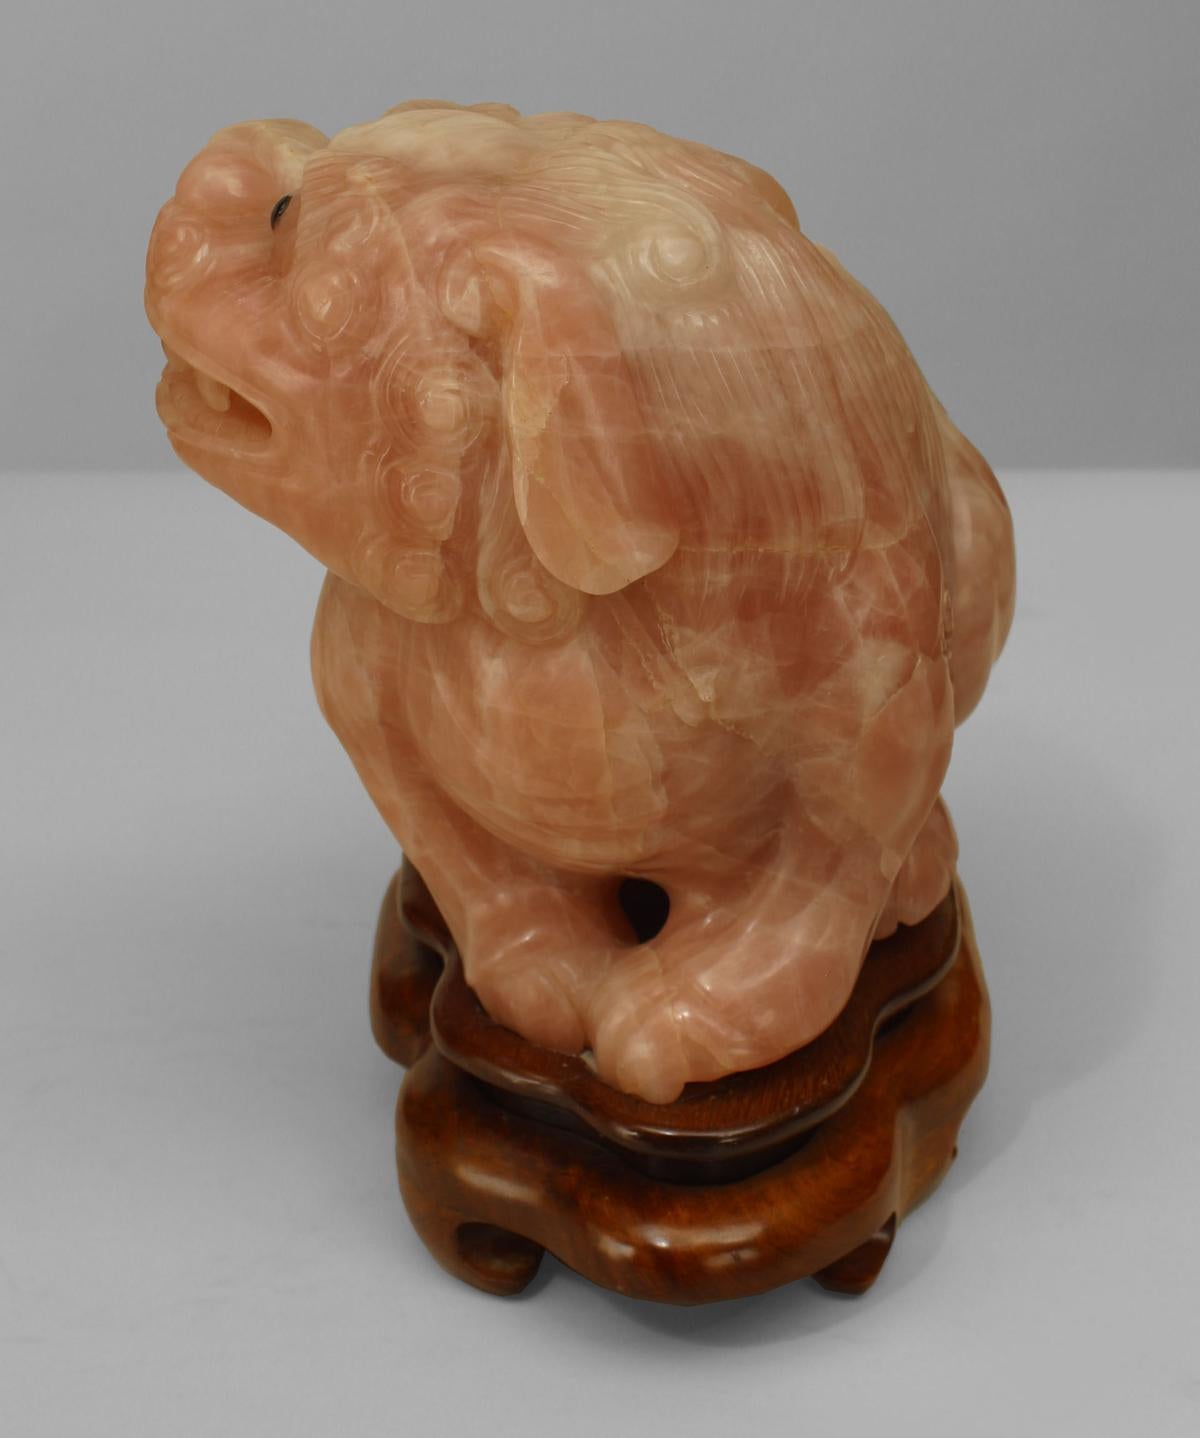 Pair of Asian Chinese rose quartz foo dogs with black eyes seated on teak bases (20th Cent).